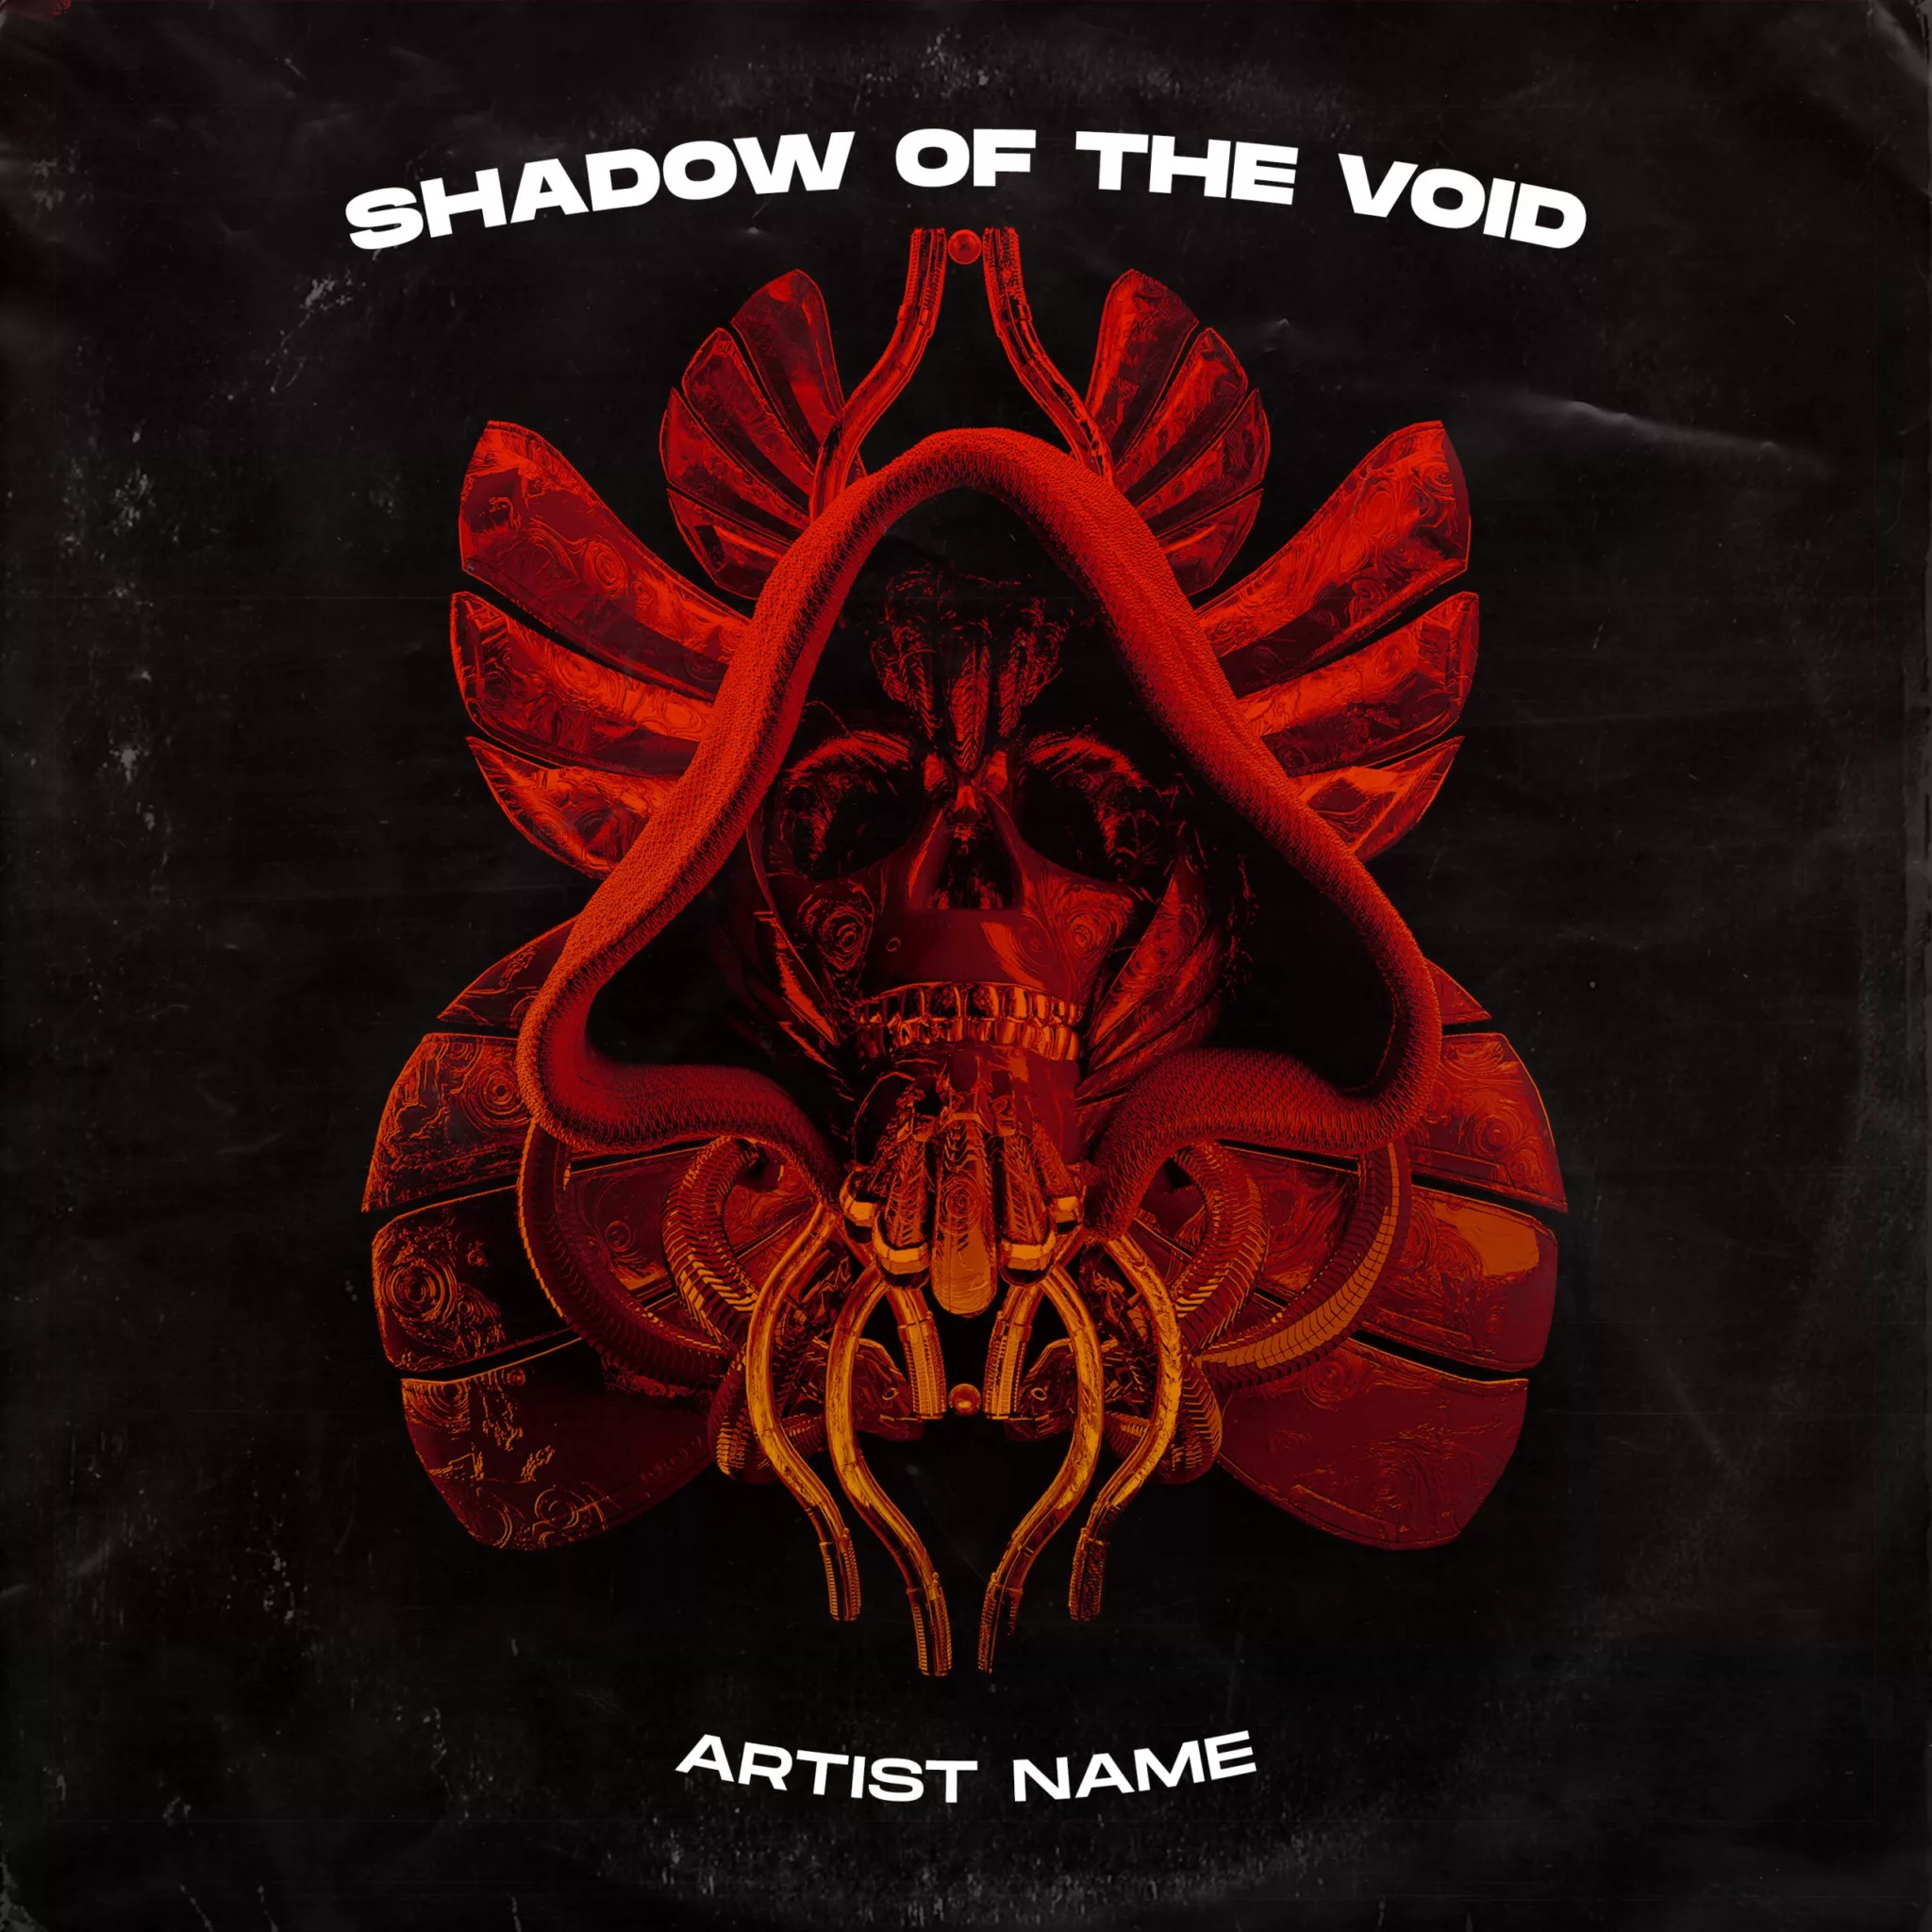 Shadow of the void cover art for sale